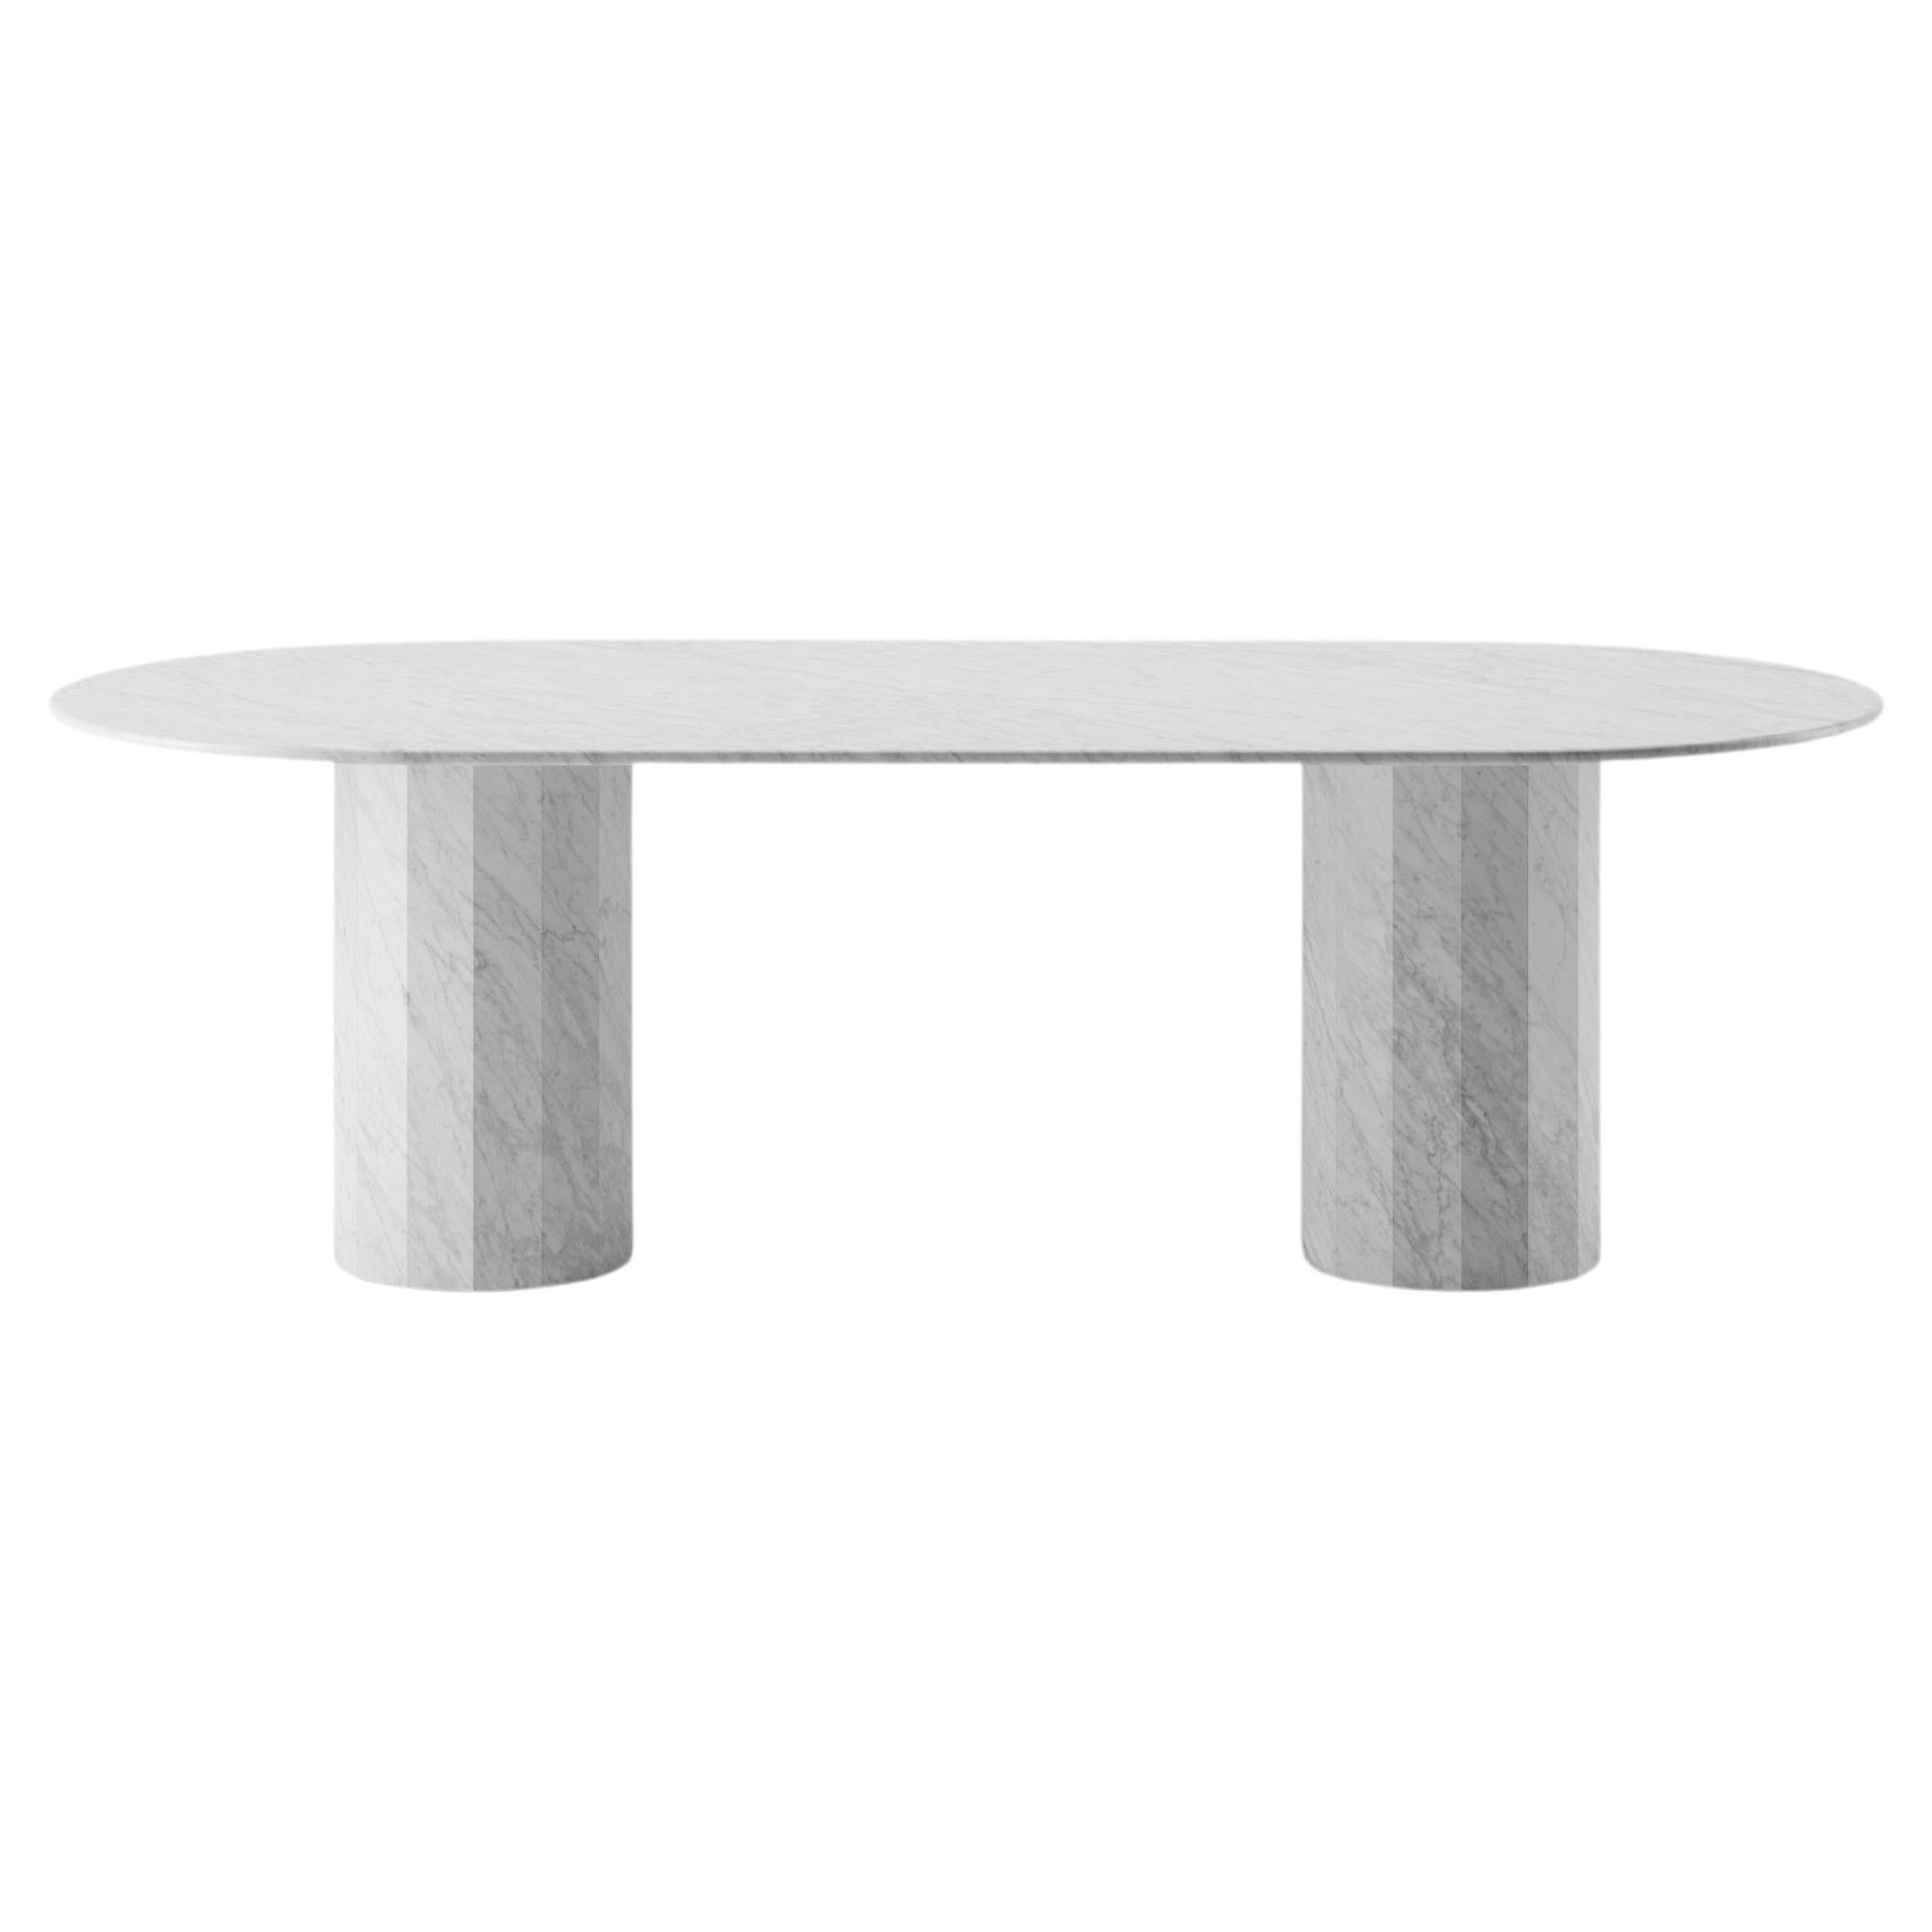 Palladian 240cm/94.4" Oval Dining Table in Bianco Carrara Marble For Sale